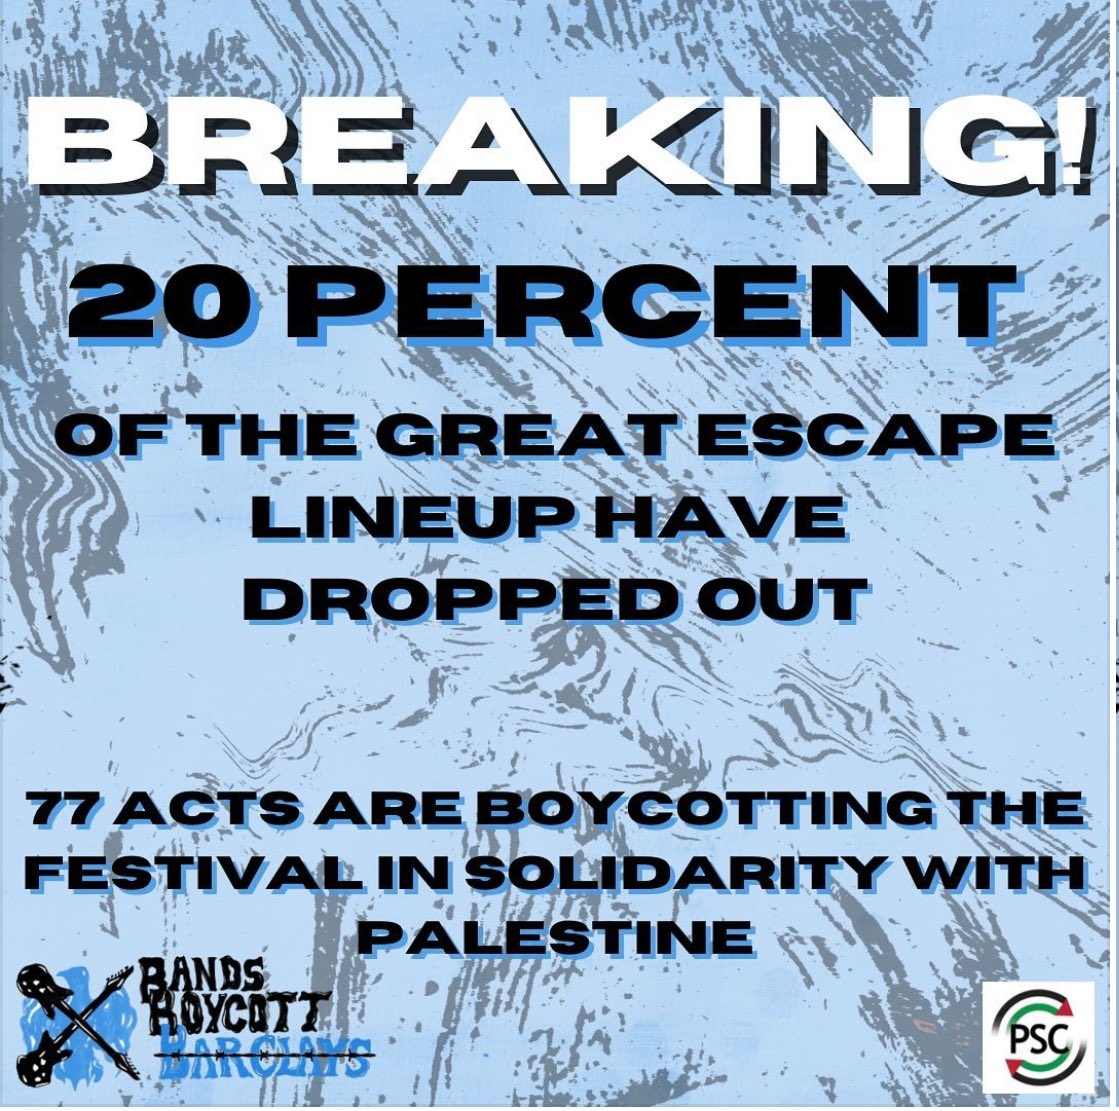 #BoycottTGE #BoycottBarclays 
6️⃣ more acts have so far pulled out of Brighton's @thegreatescape festival just today!
Will there be anyone left by the opening on Wednesday?